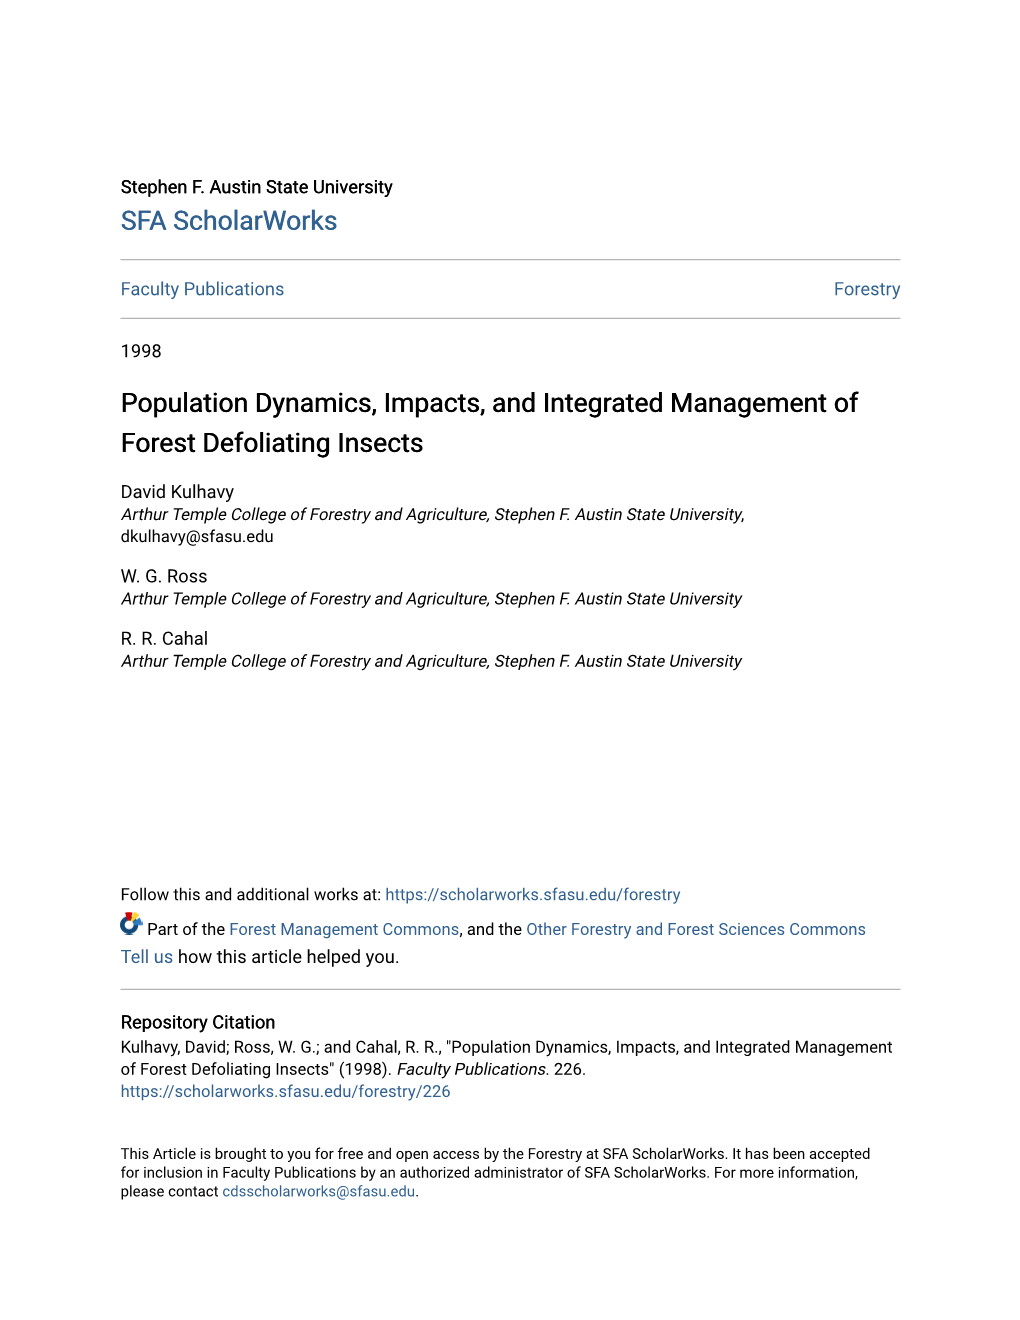 Population Dynamics, Impacts, and Integrated Management of Forest Defoliating Insects